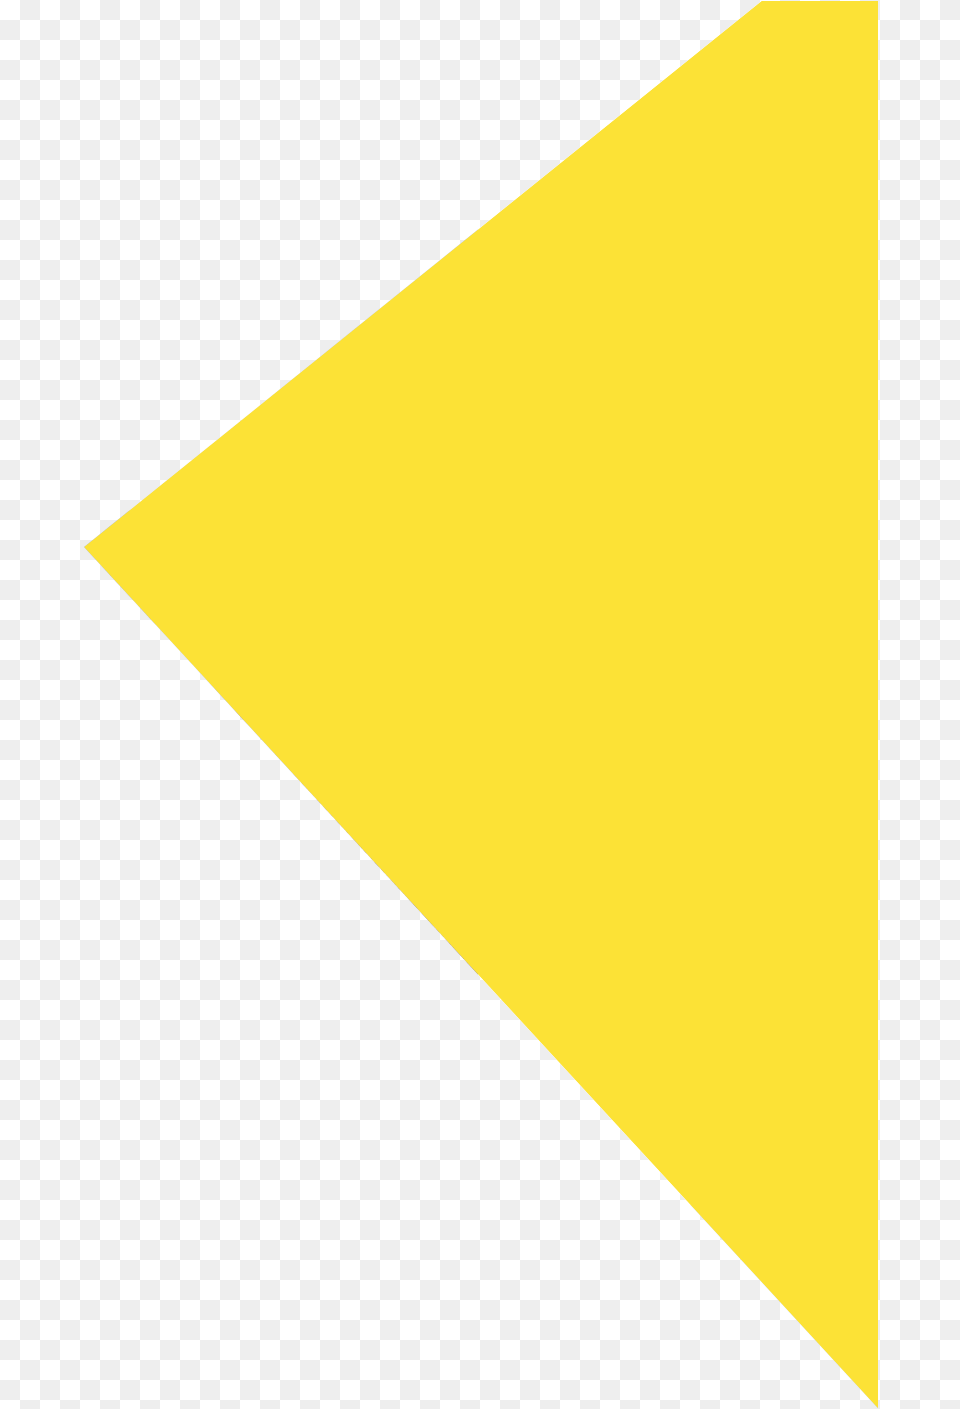 Triangle, Lighting Free Transparent Png